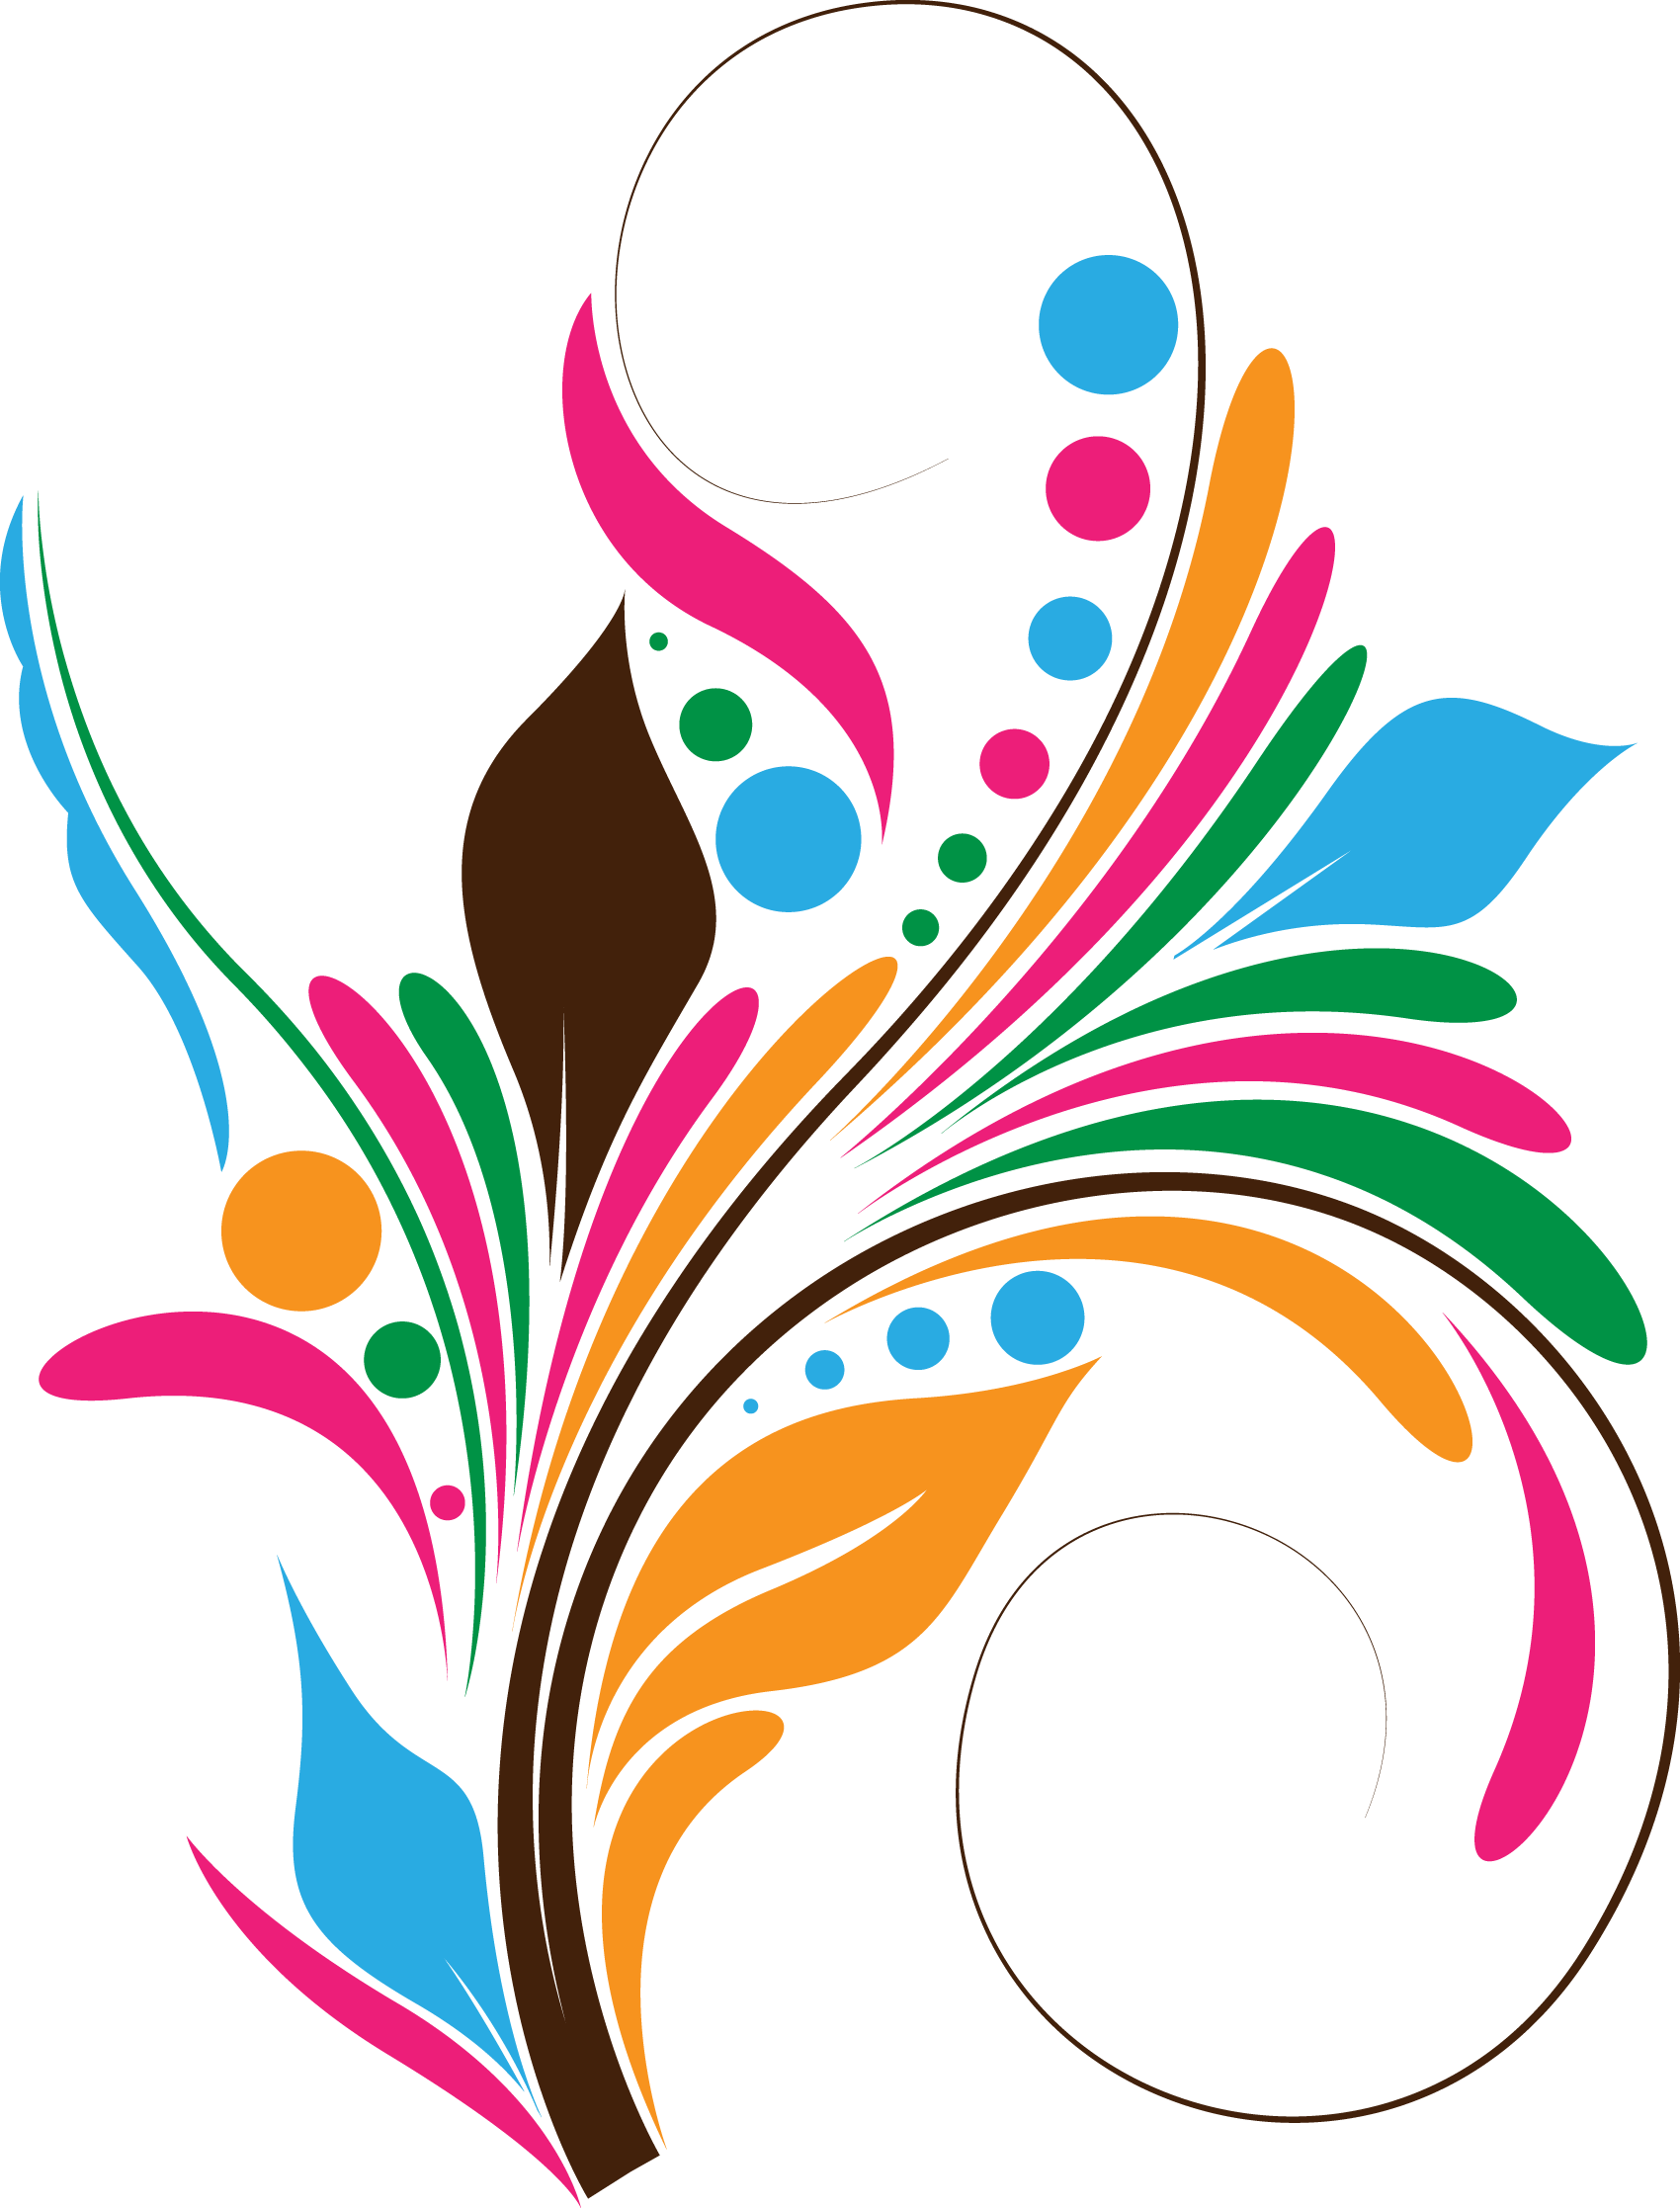 Love The Shape And Colors - Corel Draw Design Png (1700x2234)